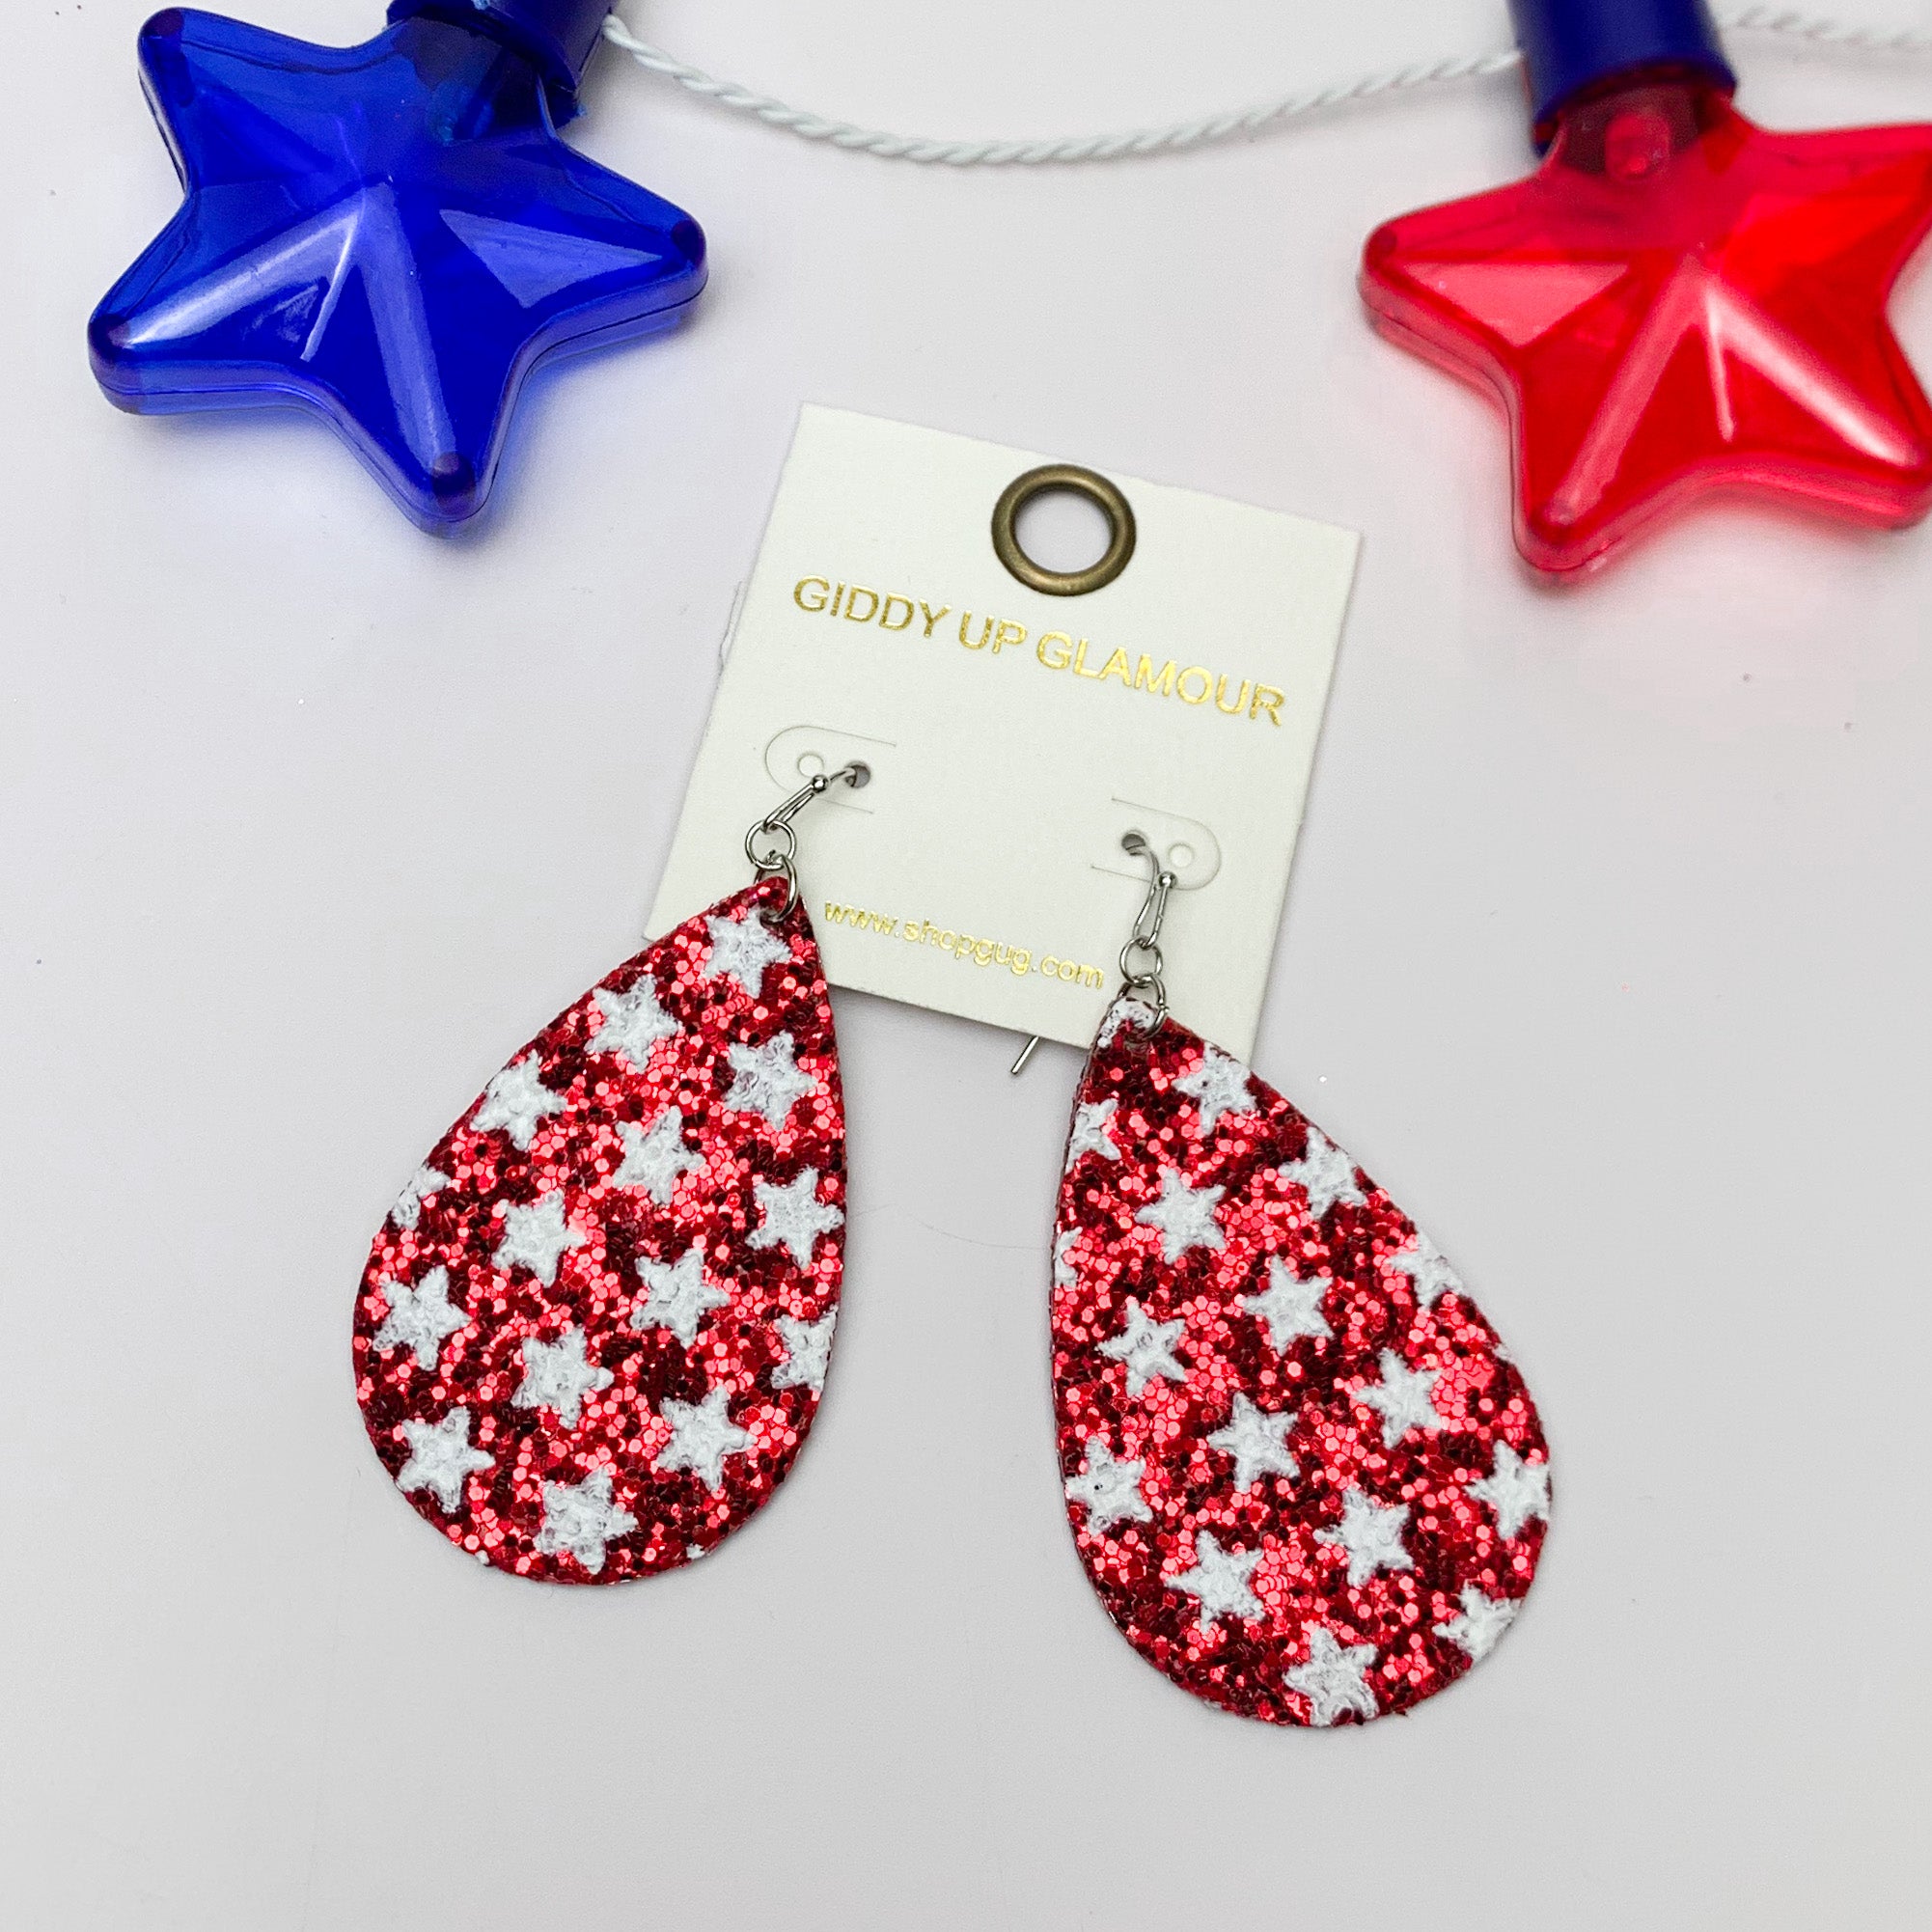 Festive Sparkly Red Drop Earrings Filled With White Stars. Pictured on a white background with red and blue stars at the top as an accessory. 